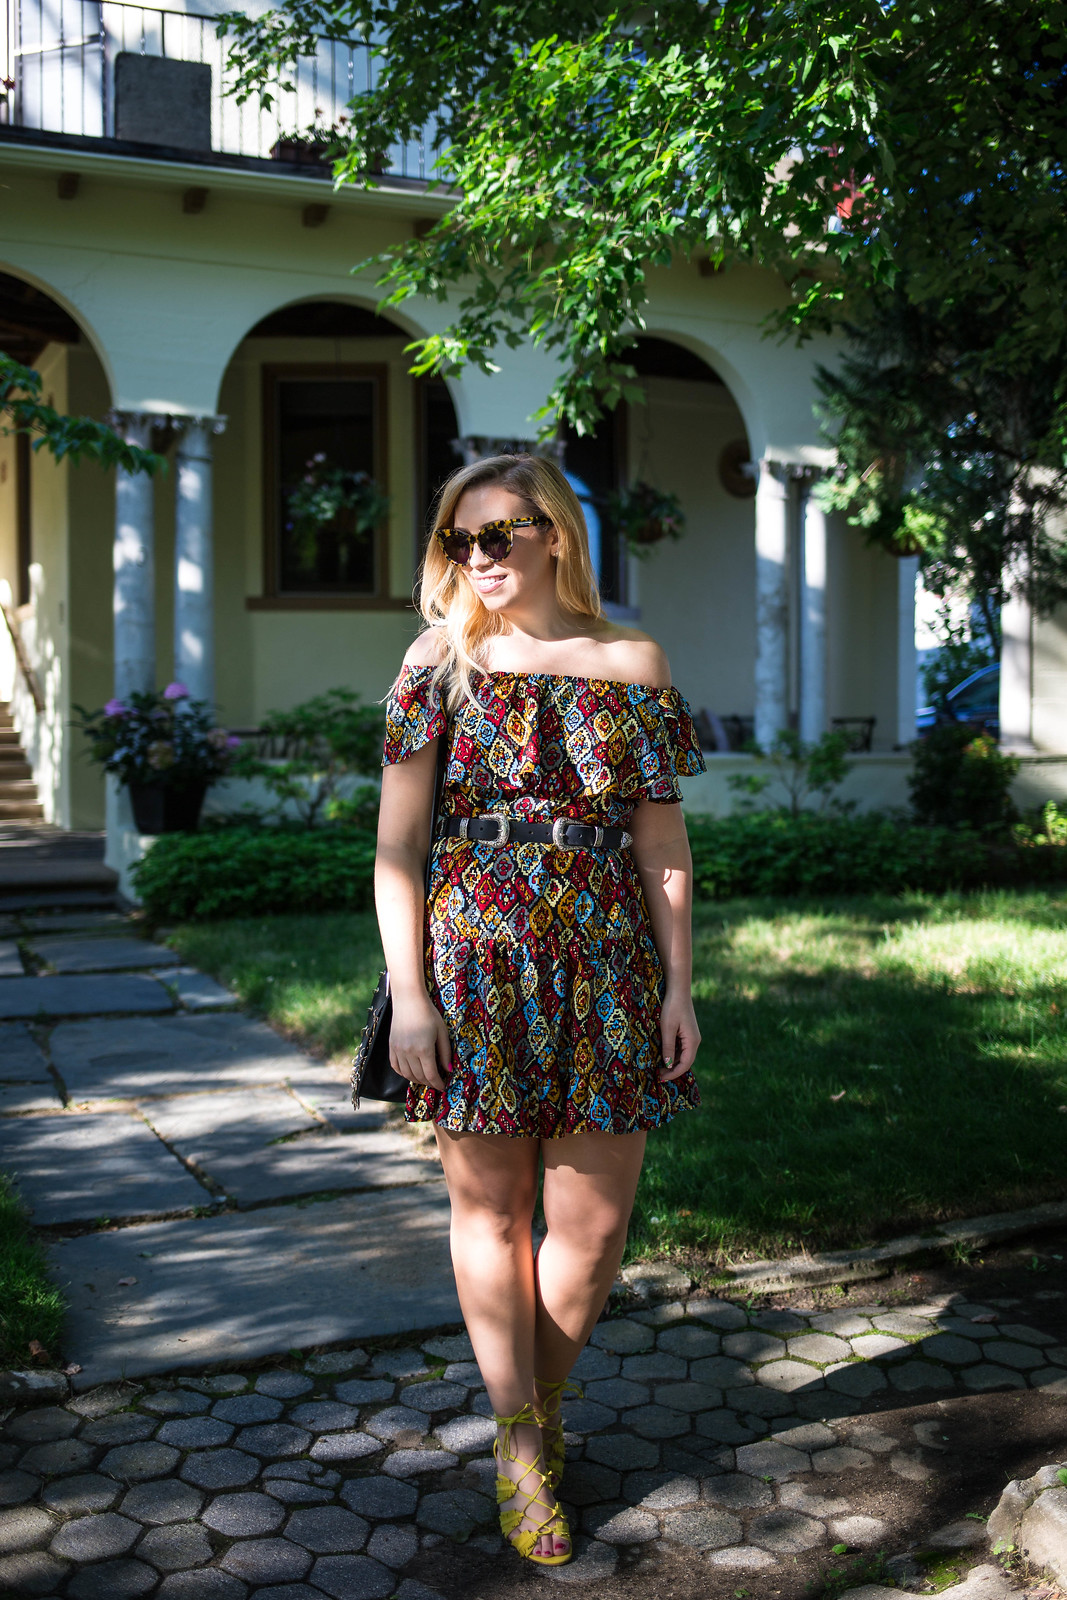 Why Printed Dresses are Better than Solids | Colorful Dress Yellow House Hastings on Hudson New York